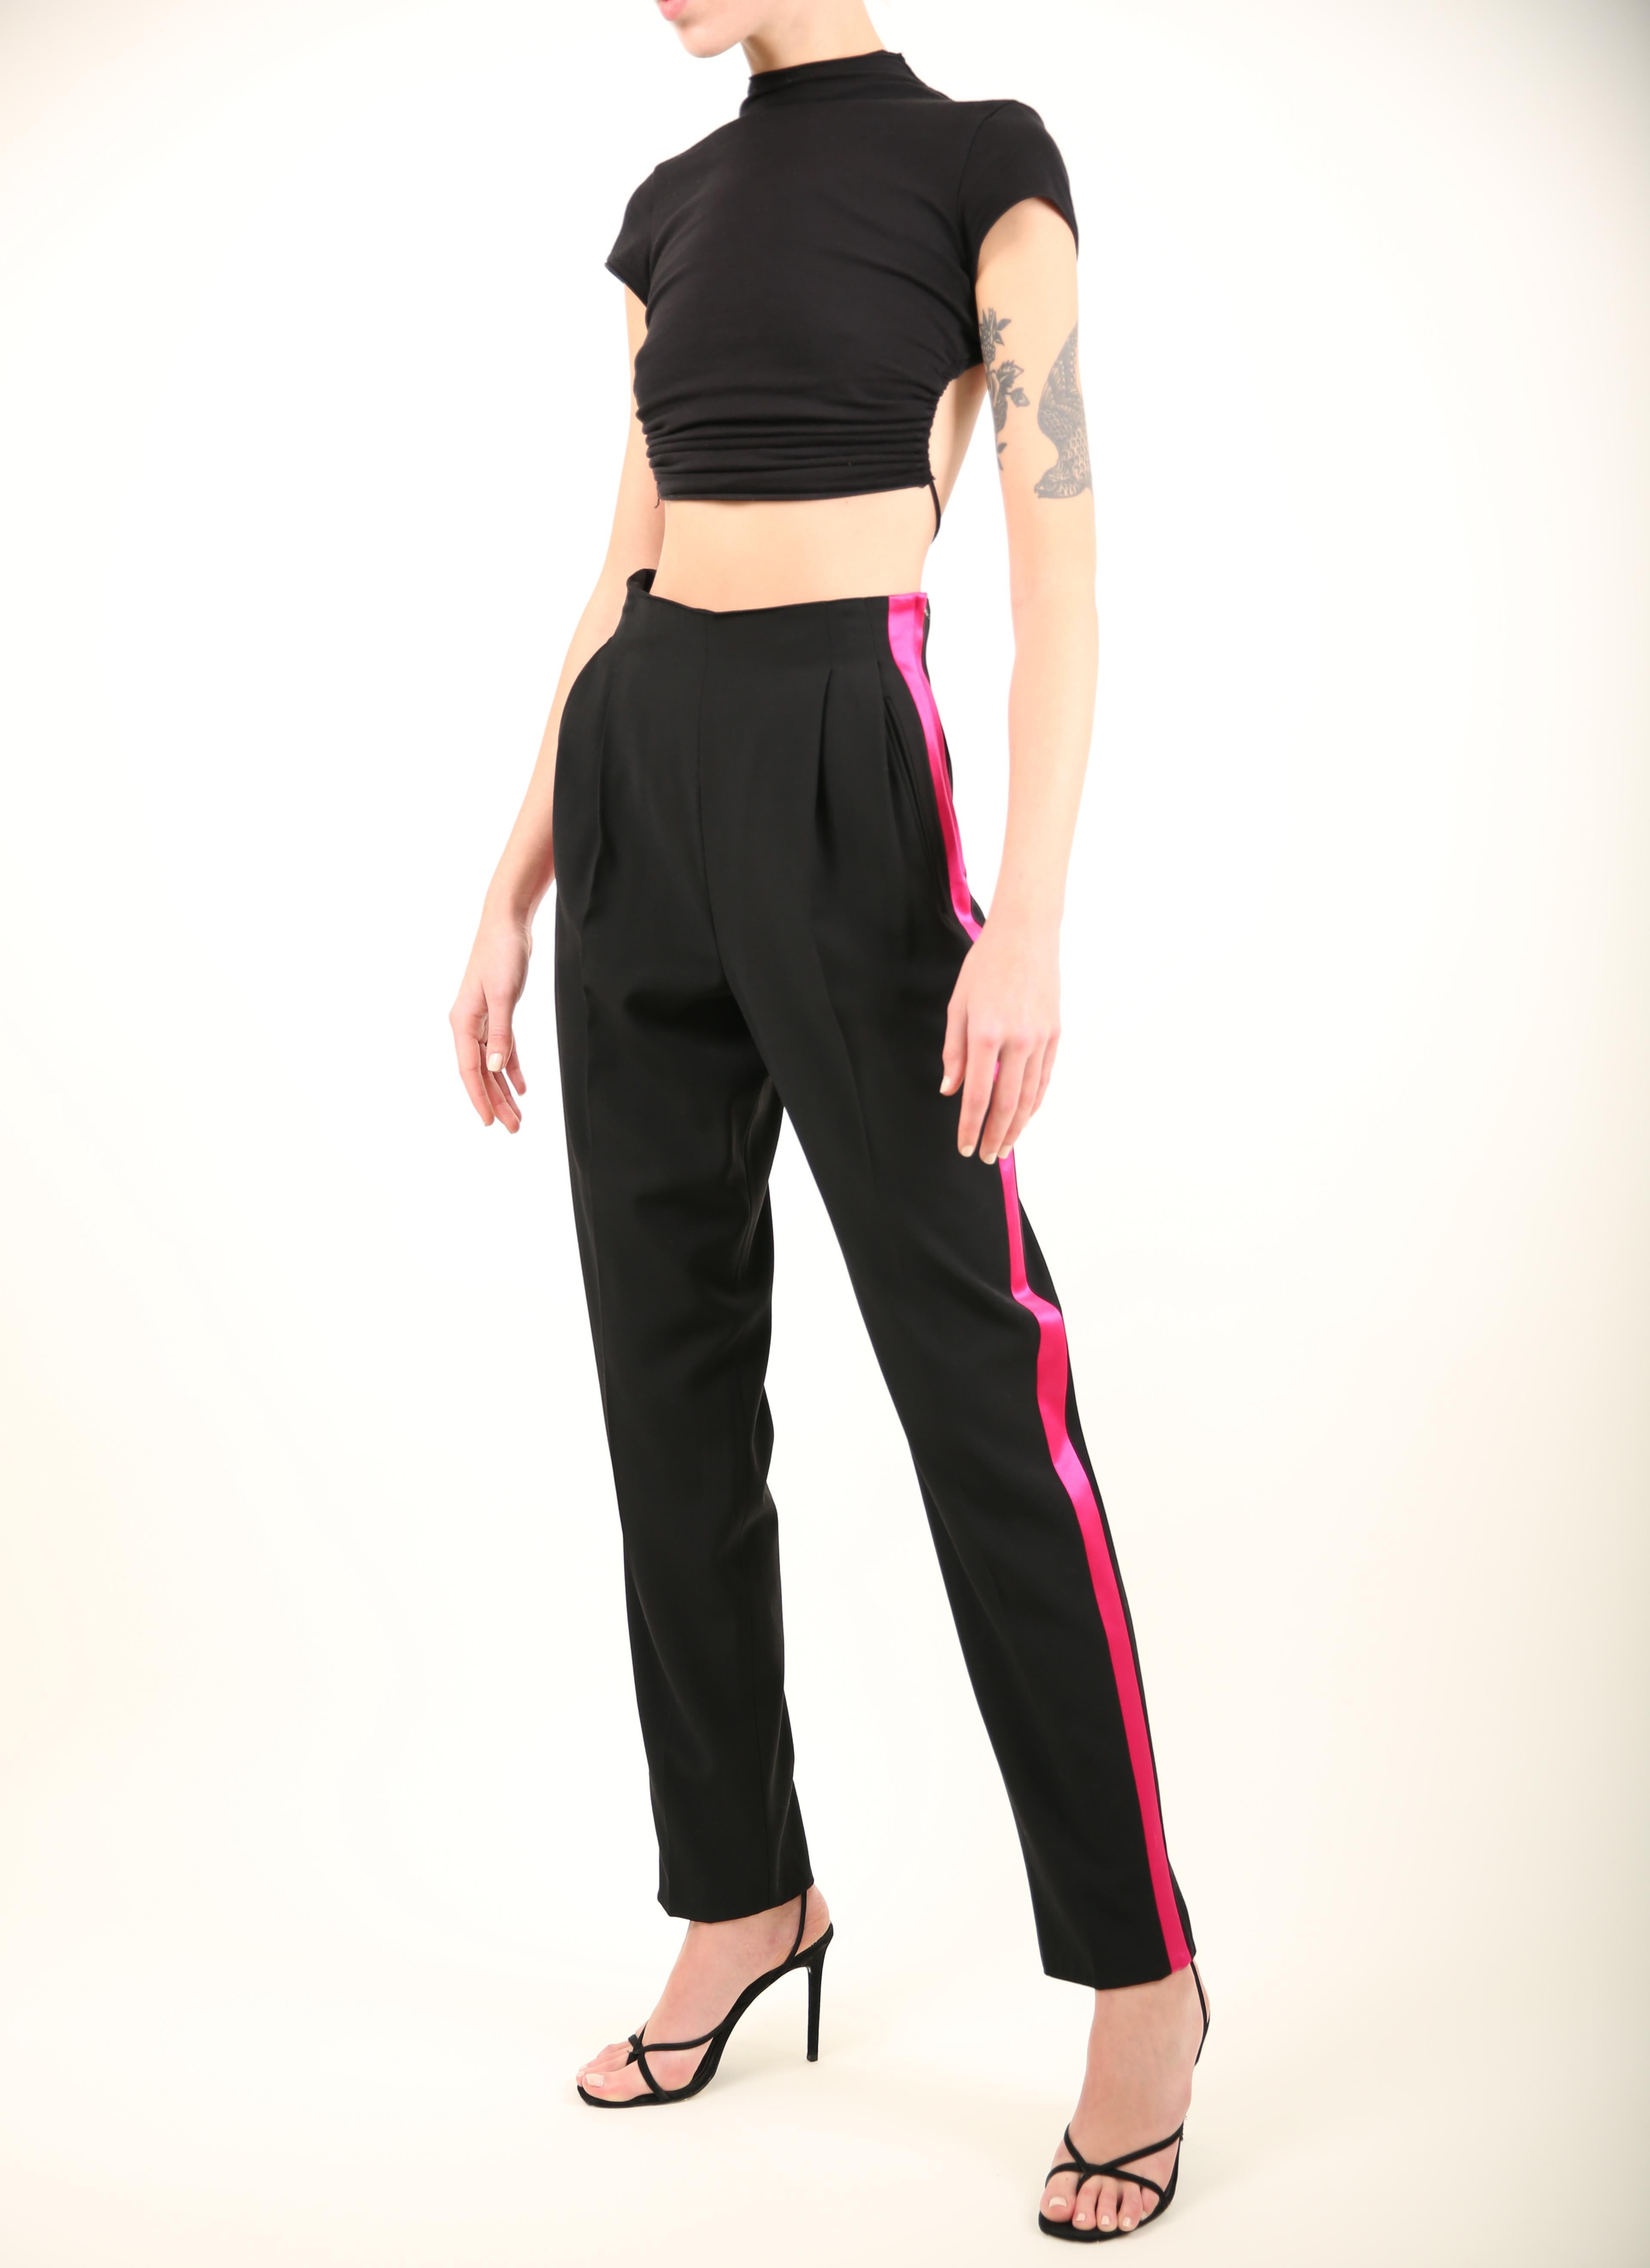 black trousers with pink side stripe